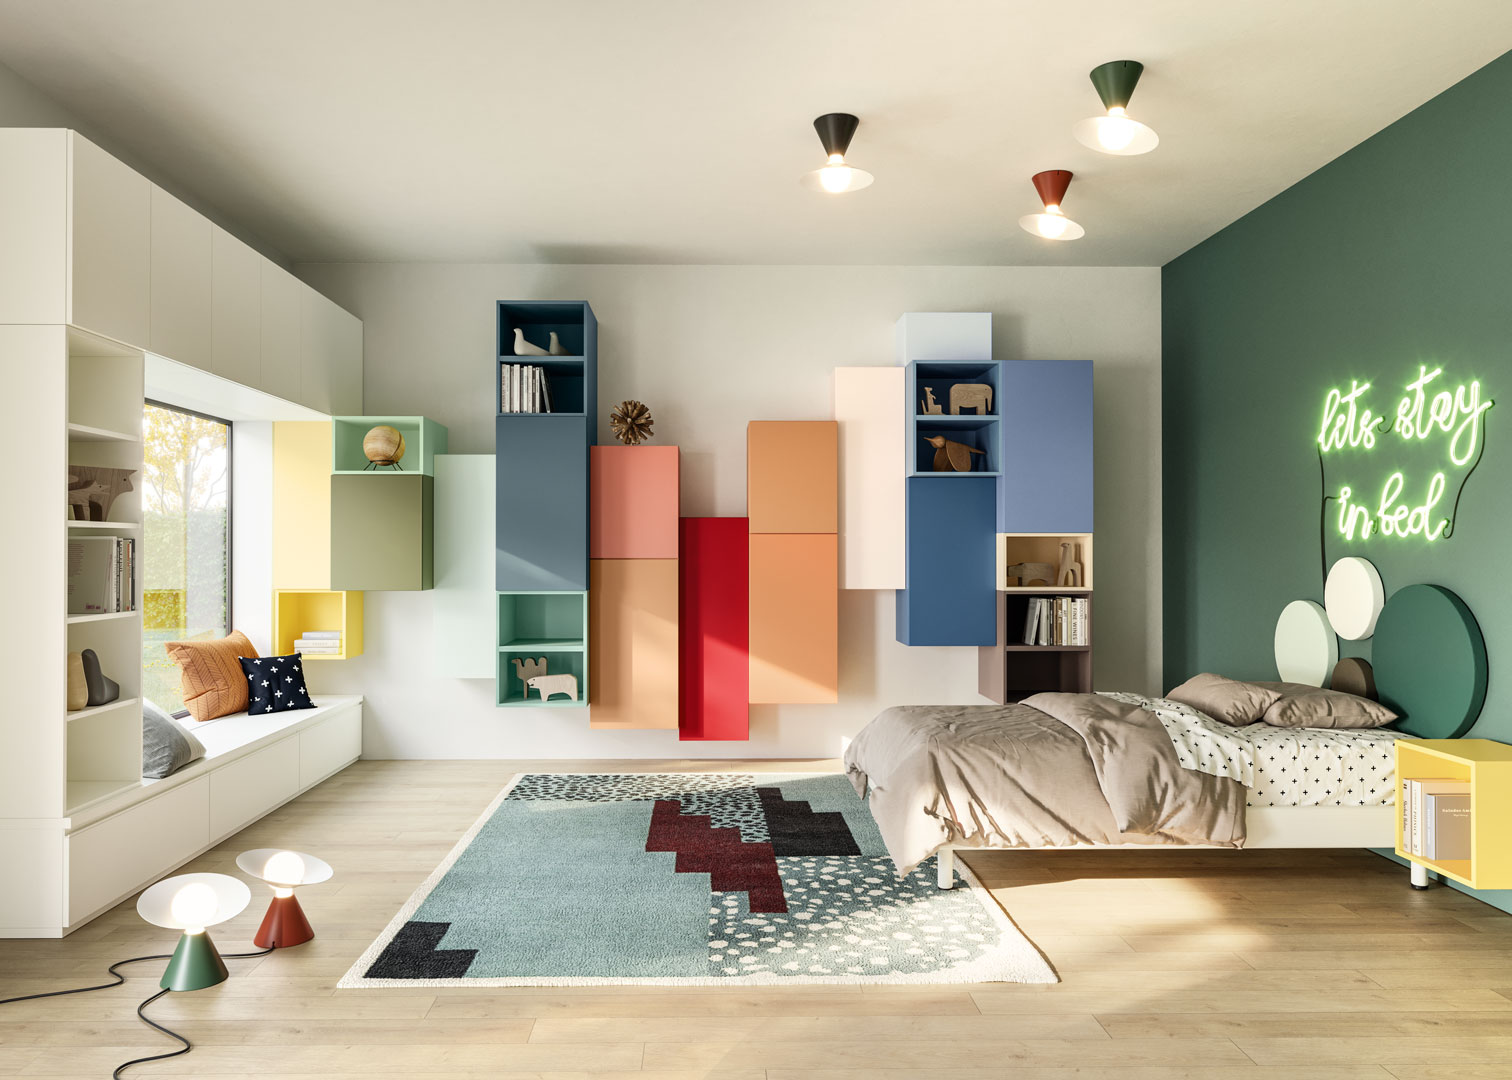 Giessegi launches the new 2023 Uno per Tutti collection of kids’ bedrooms - Giessegi.it